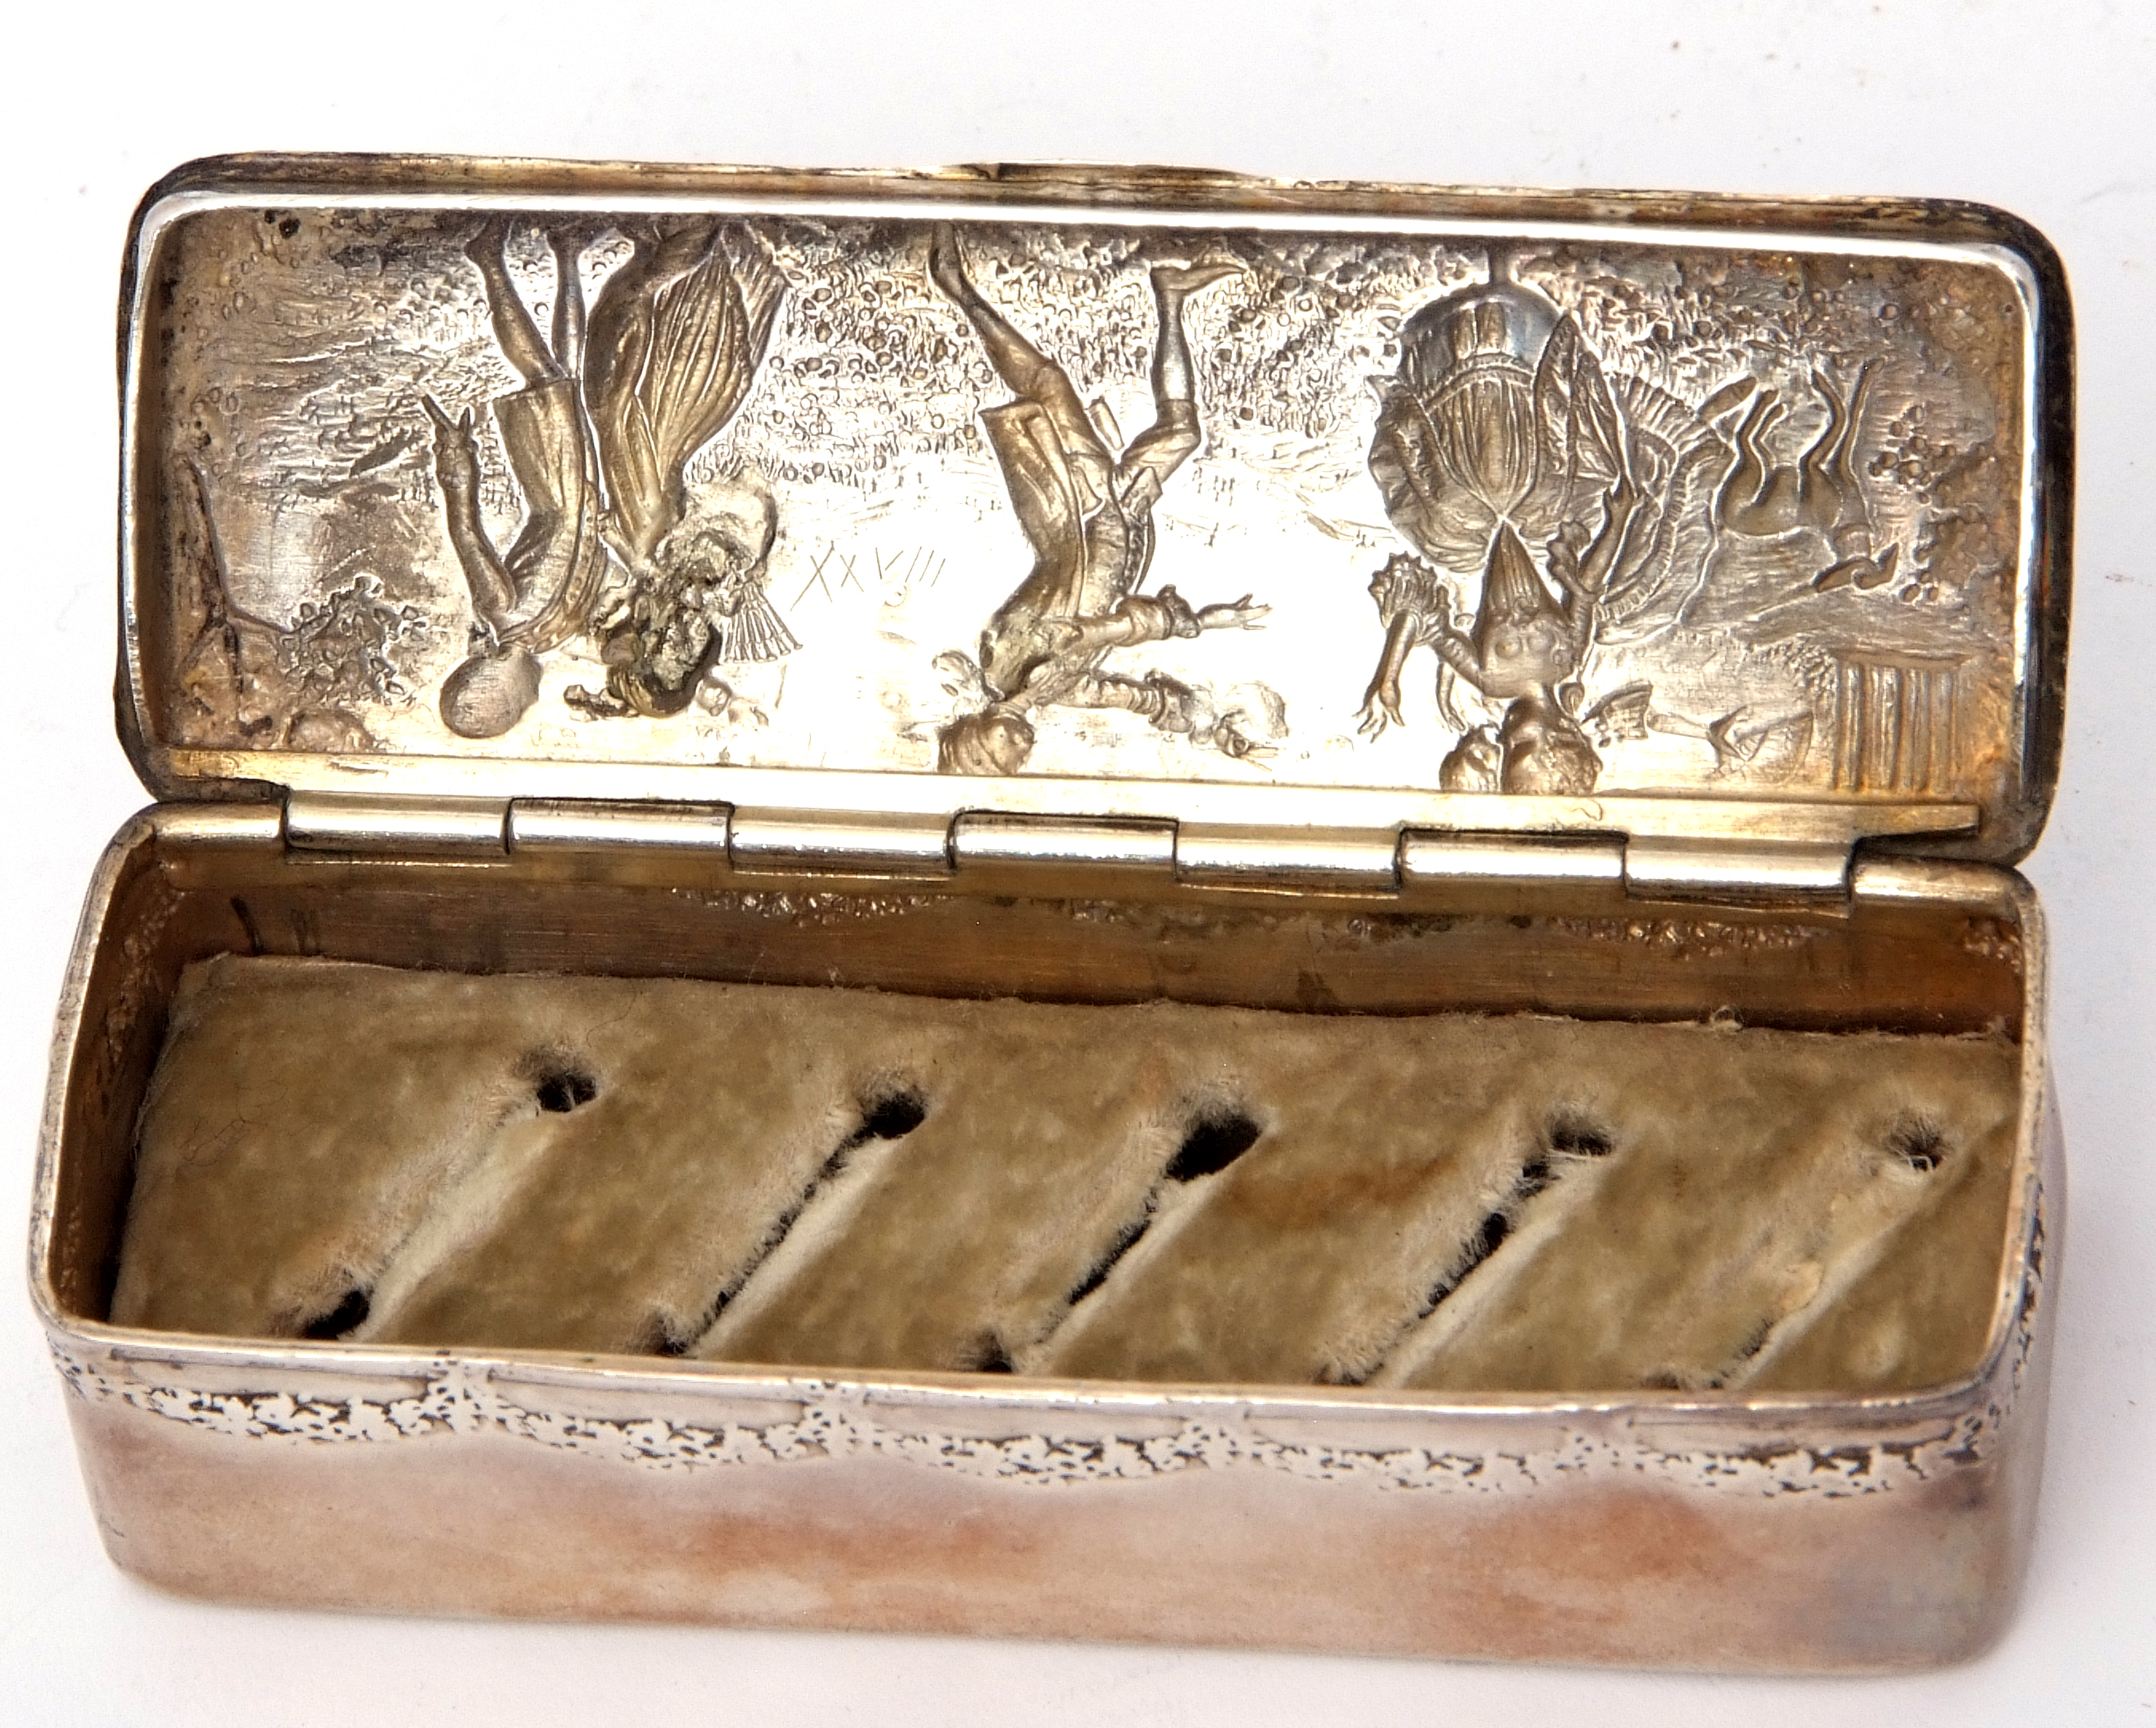 Edwardian period import hallmarked silver encased ring box, the lid embossed with romantic - Image 2 of 2